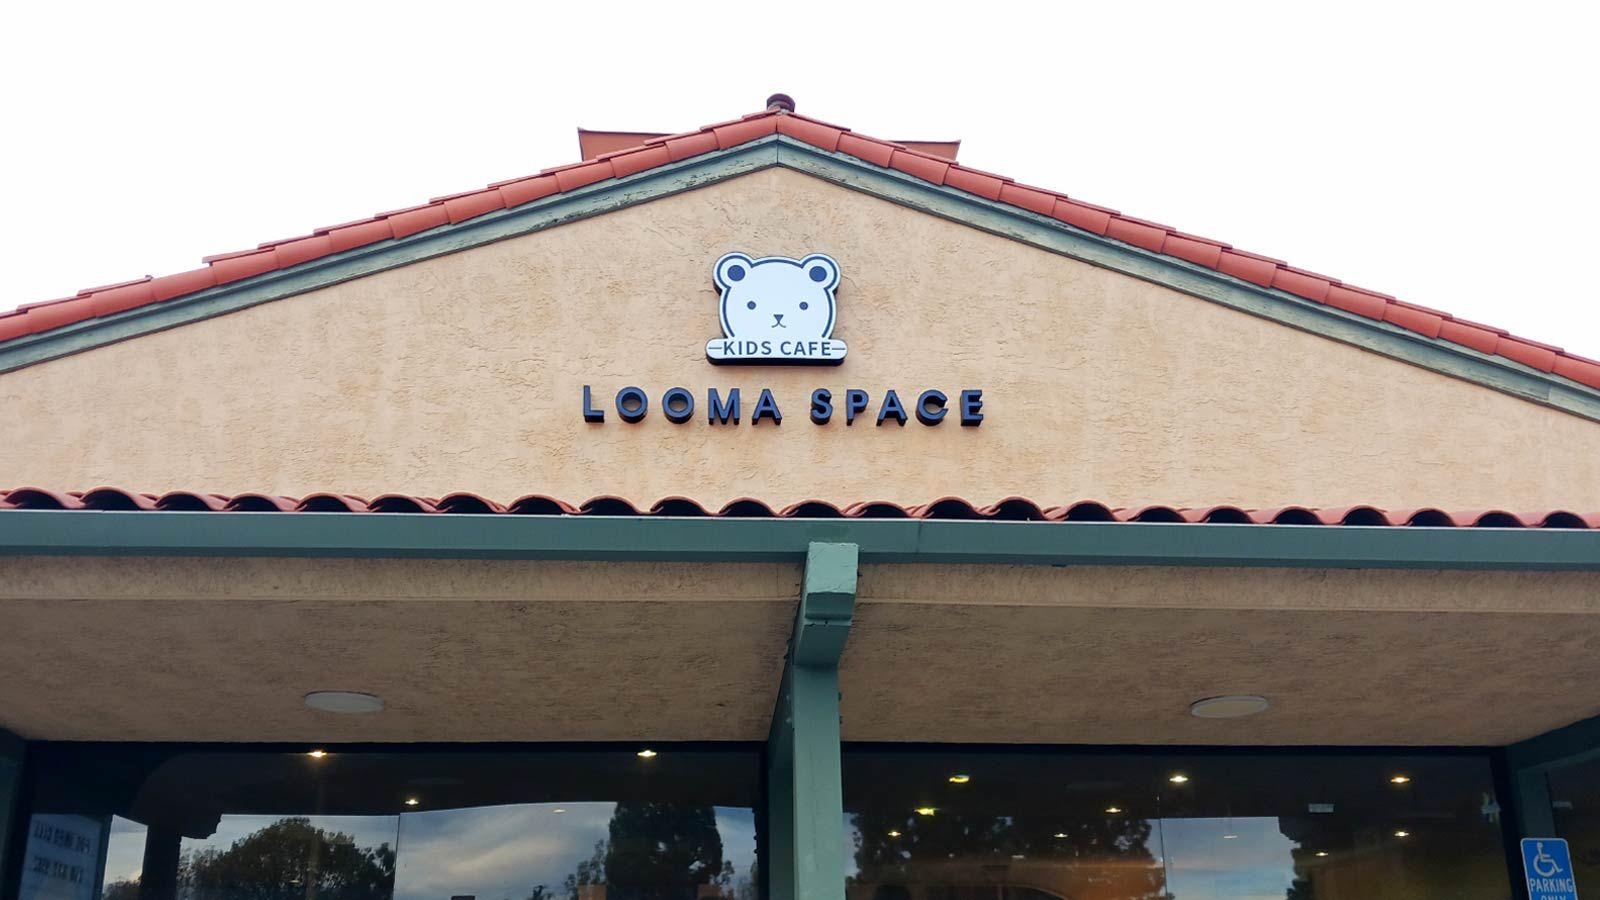 Looma Space 3D sign installed on the facade